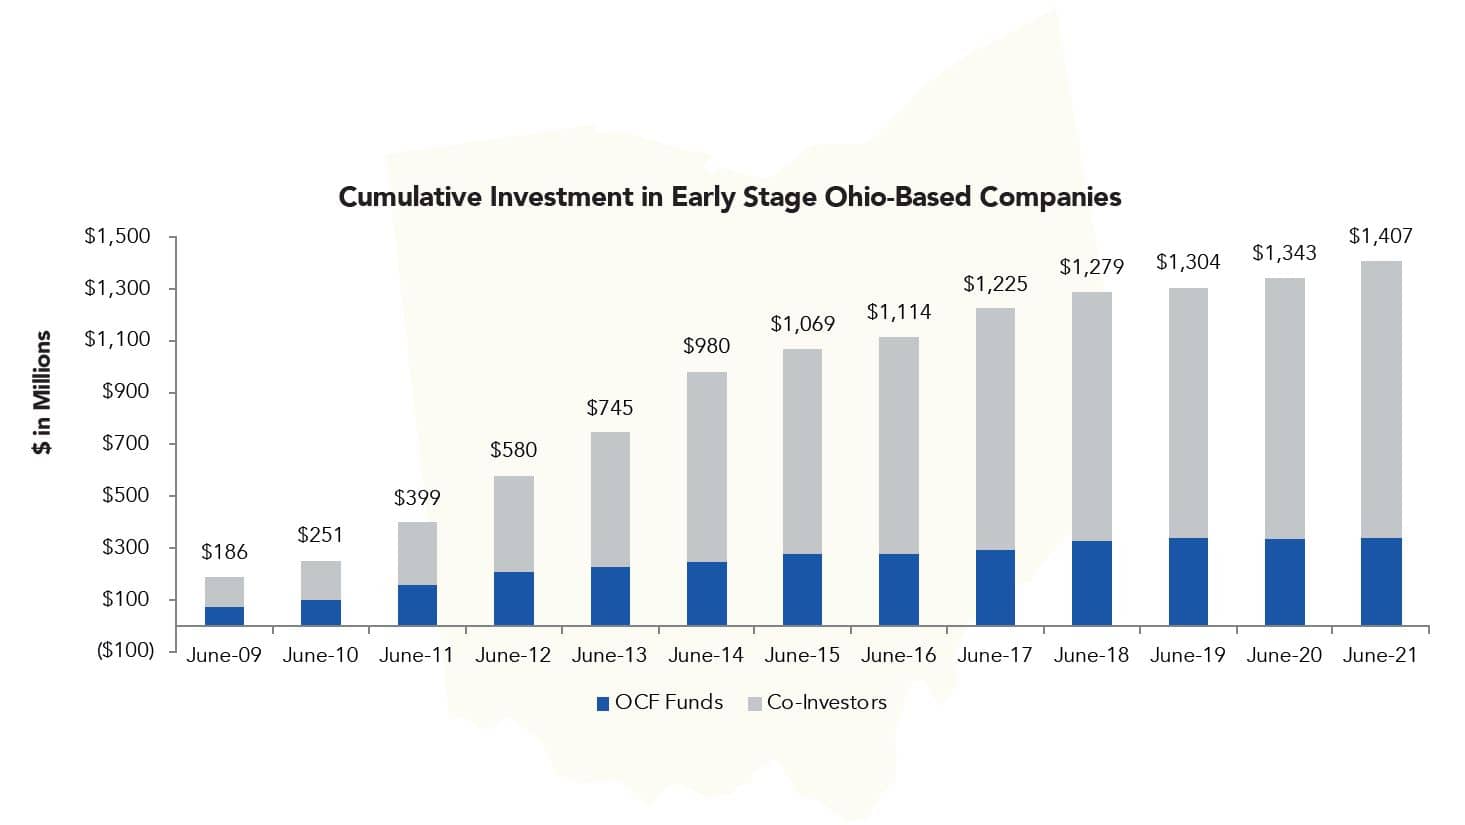 cumulative investment in early stage ohio-based companies June 2009 through June 2021